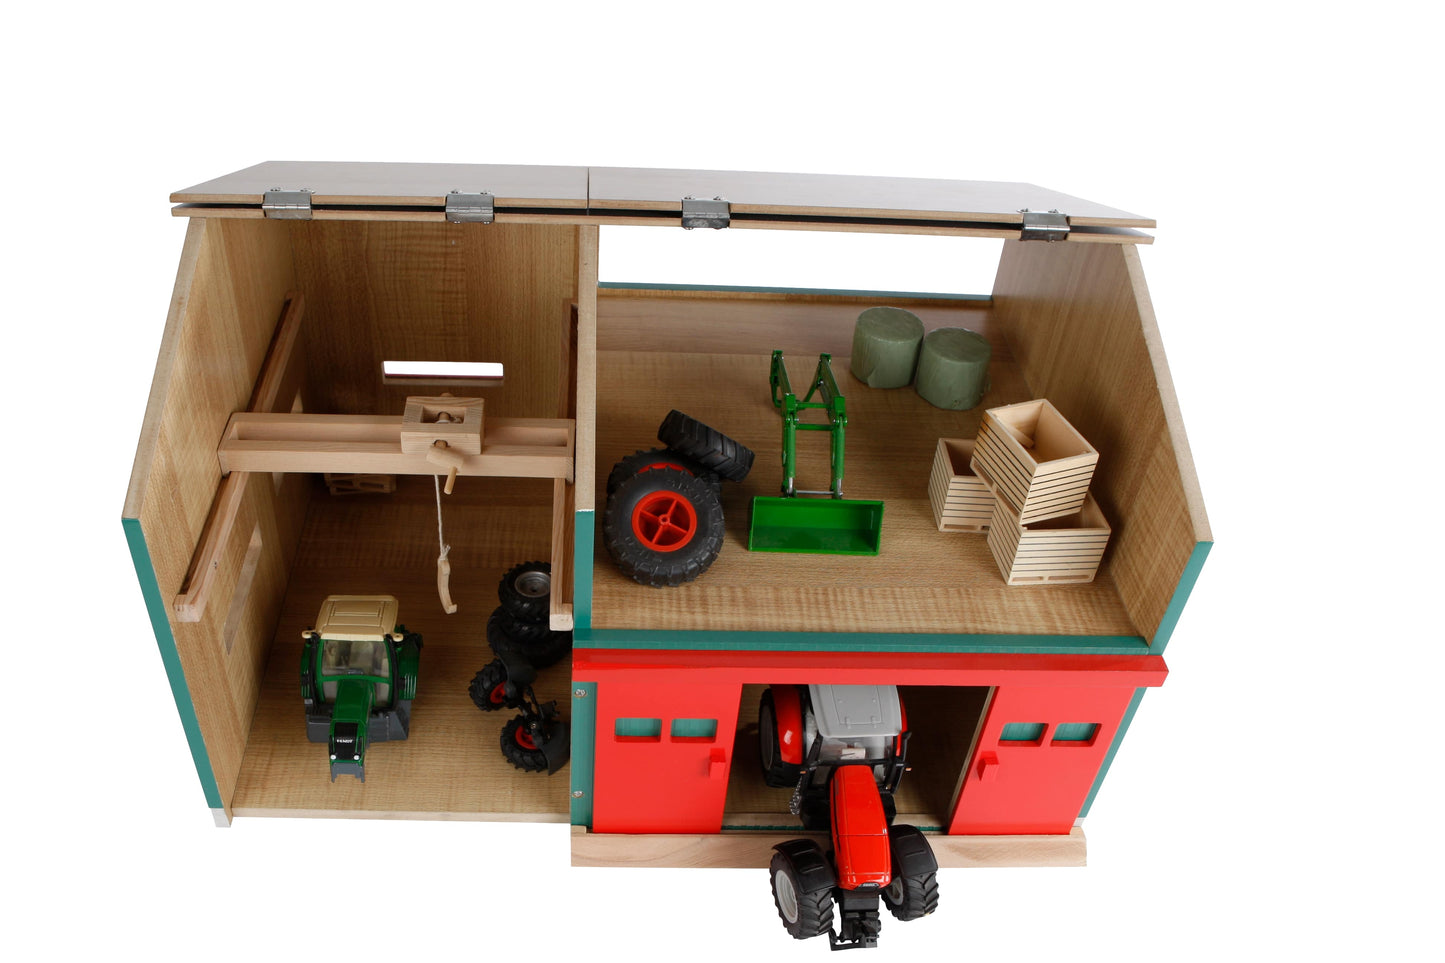 1:32 scale Wooden Workshop Toy With Storage